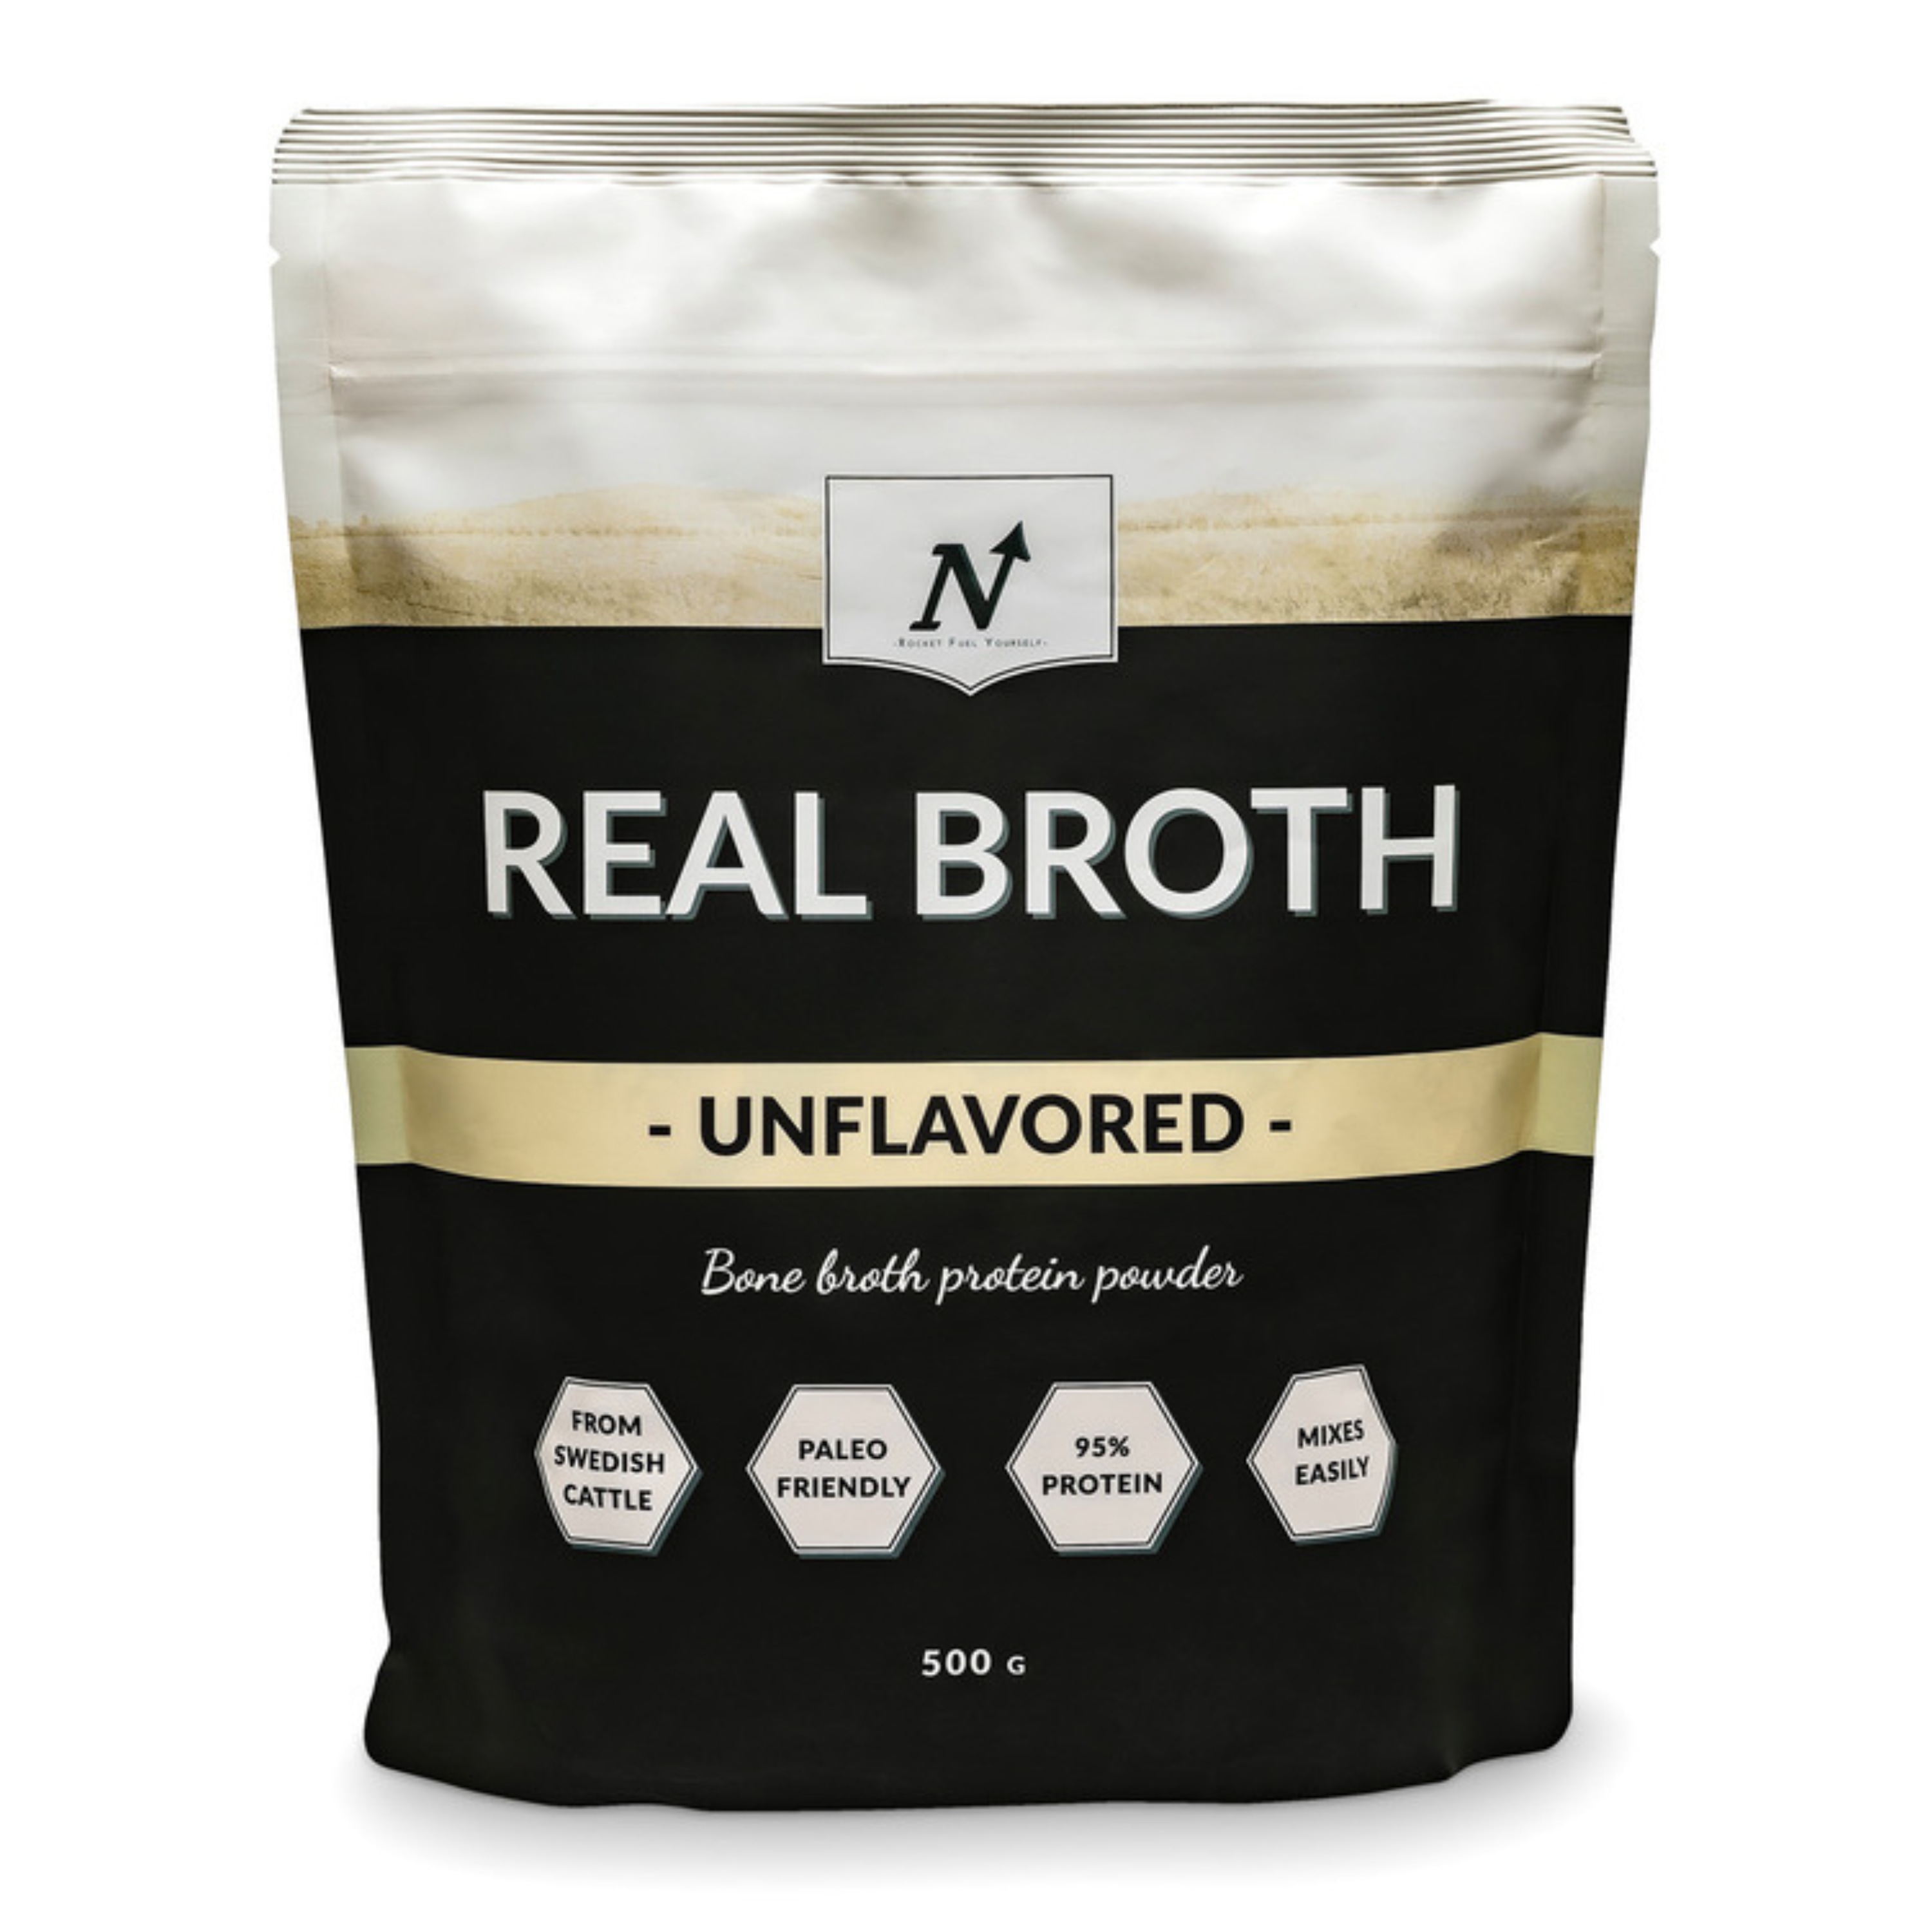 Real Broth Unflavored 500g